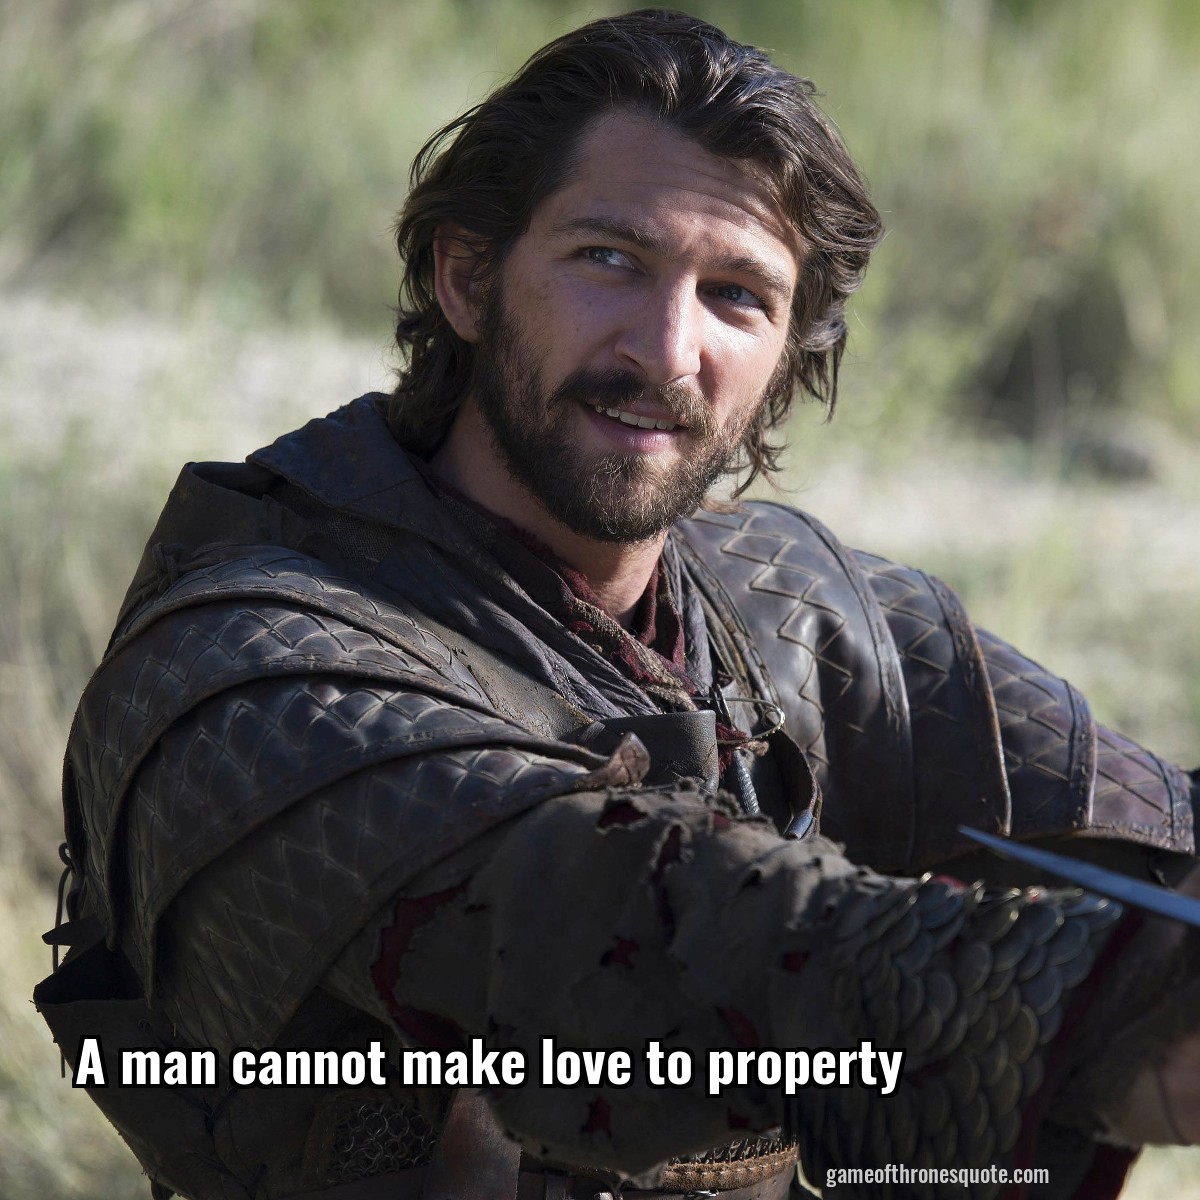 A man cannot make love to property